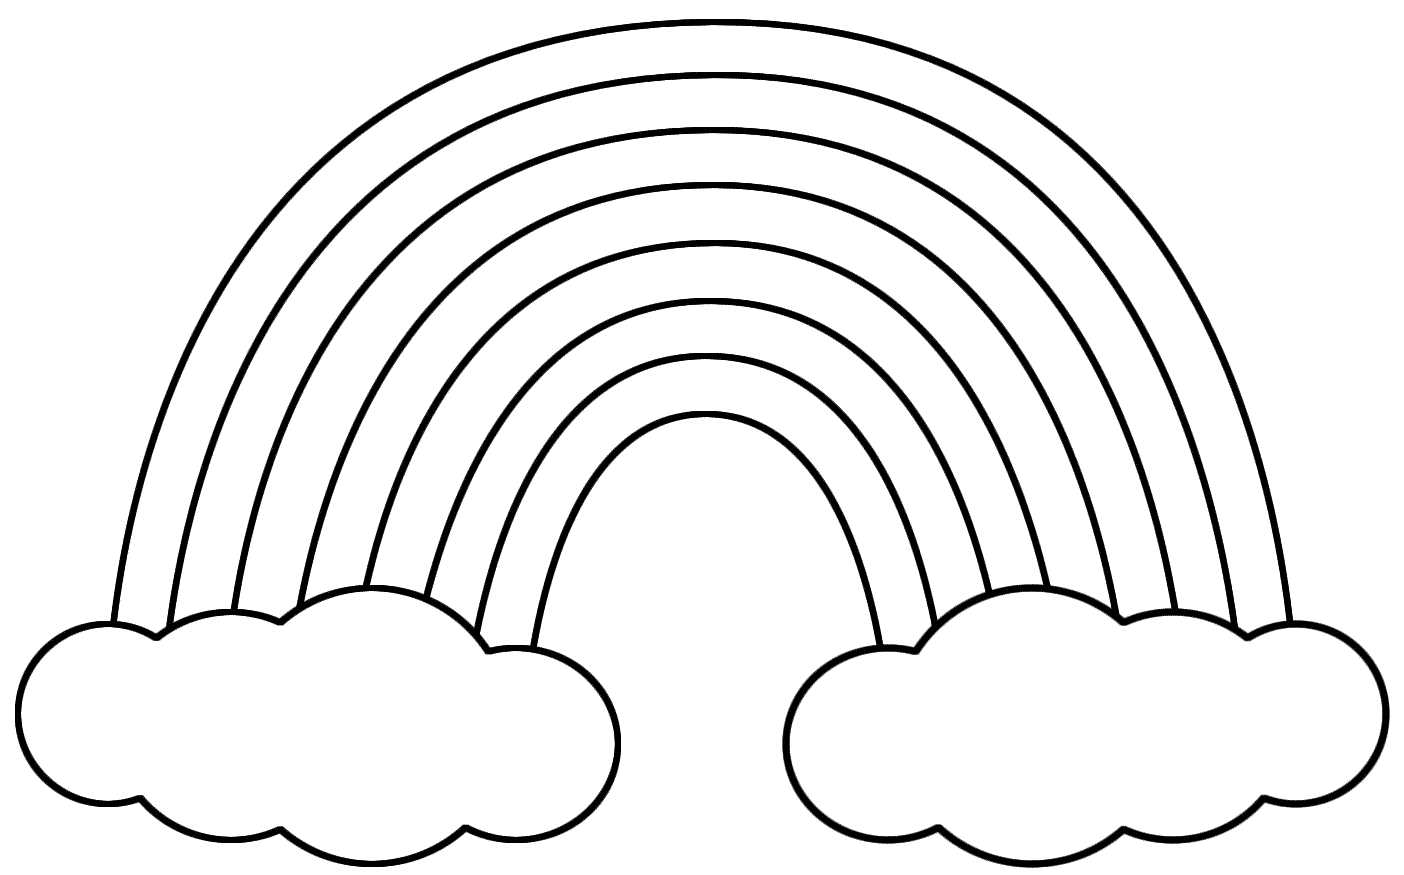 Cloud Template Printable - Clipart library